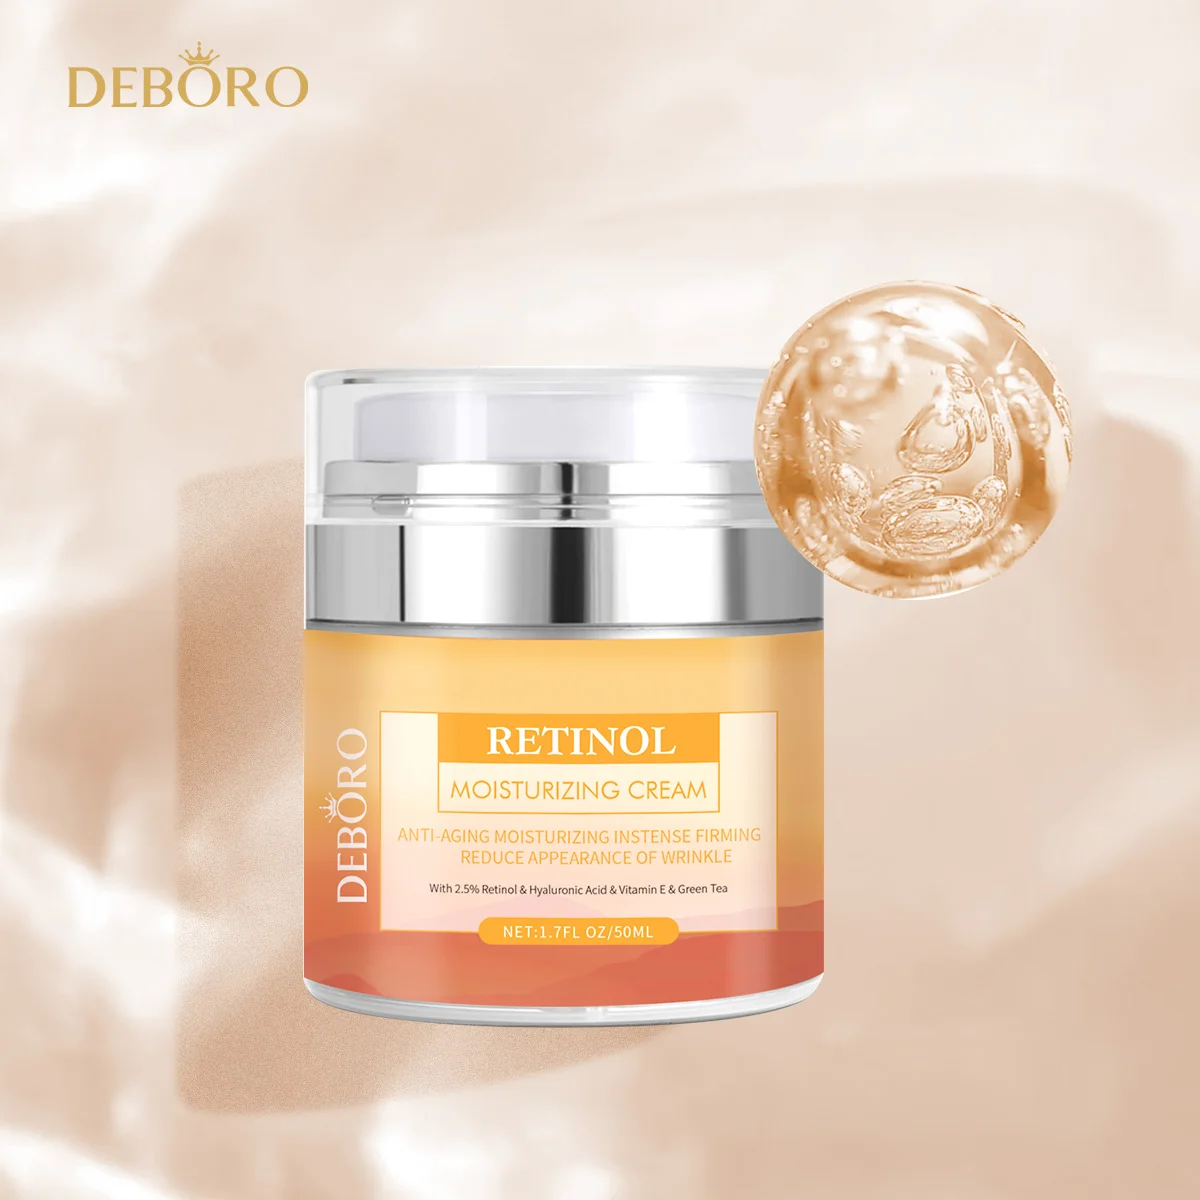 

2.5% retinol vitamin a moisturizer cream for face and eye with hyaluronic acid and vitamin c